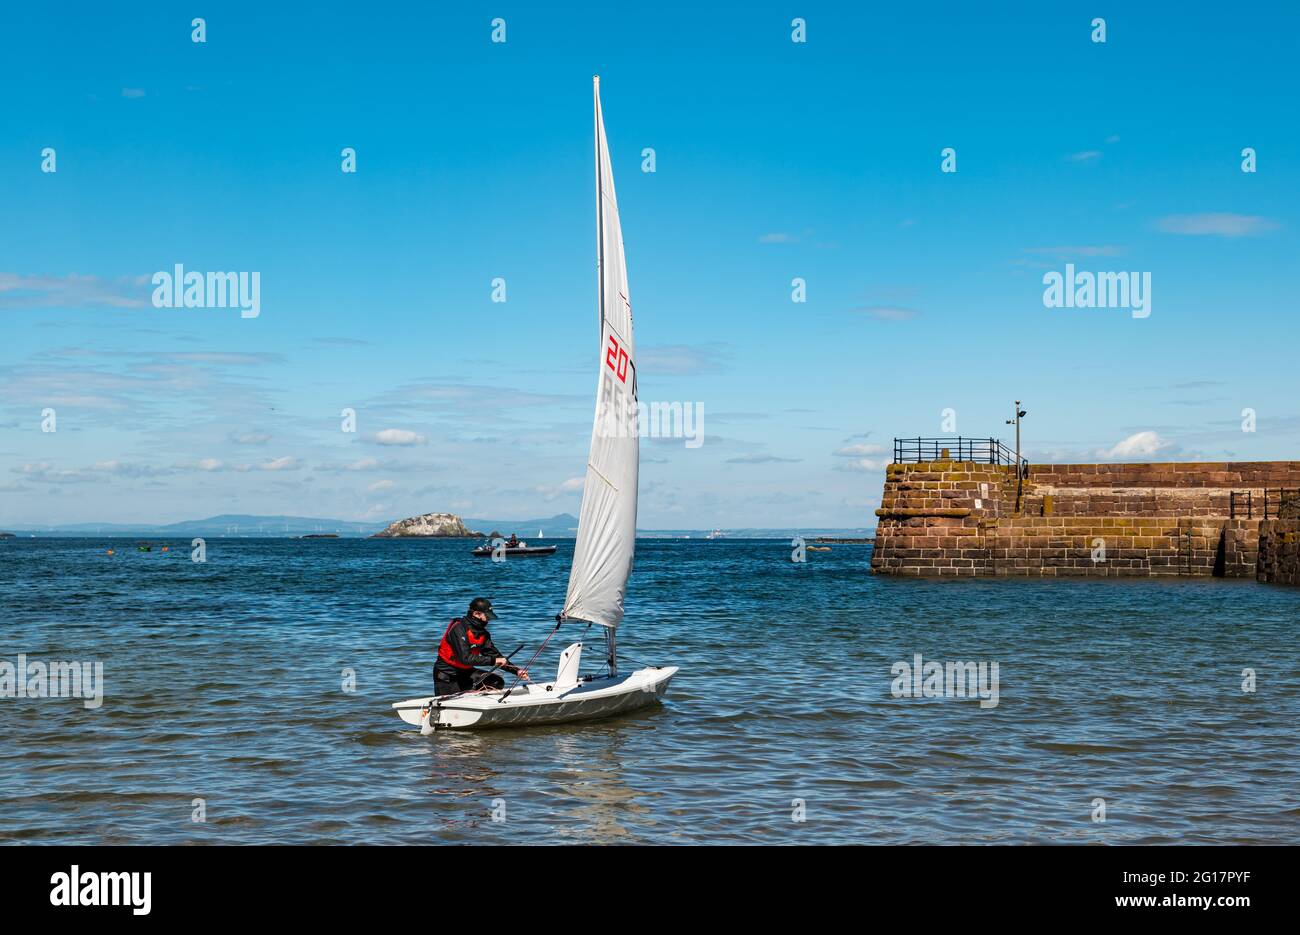 Sailing dinghy in West Bay in Summer sunshine, North Berwick, East Lothian, Scotland, UK Stock Photo